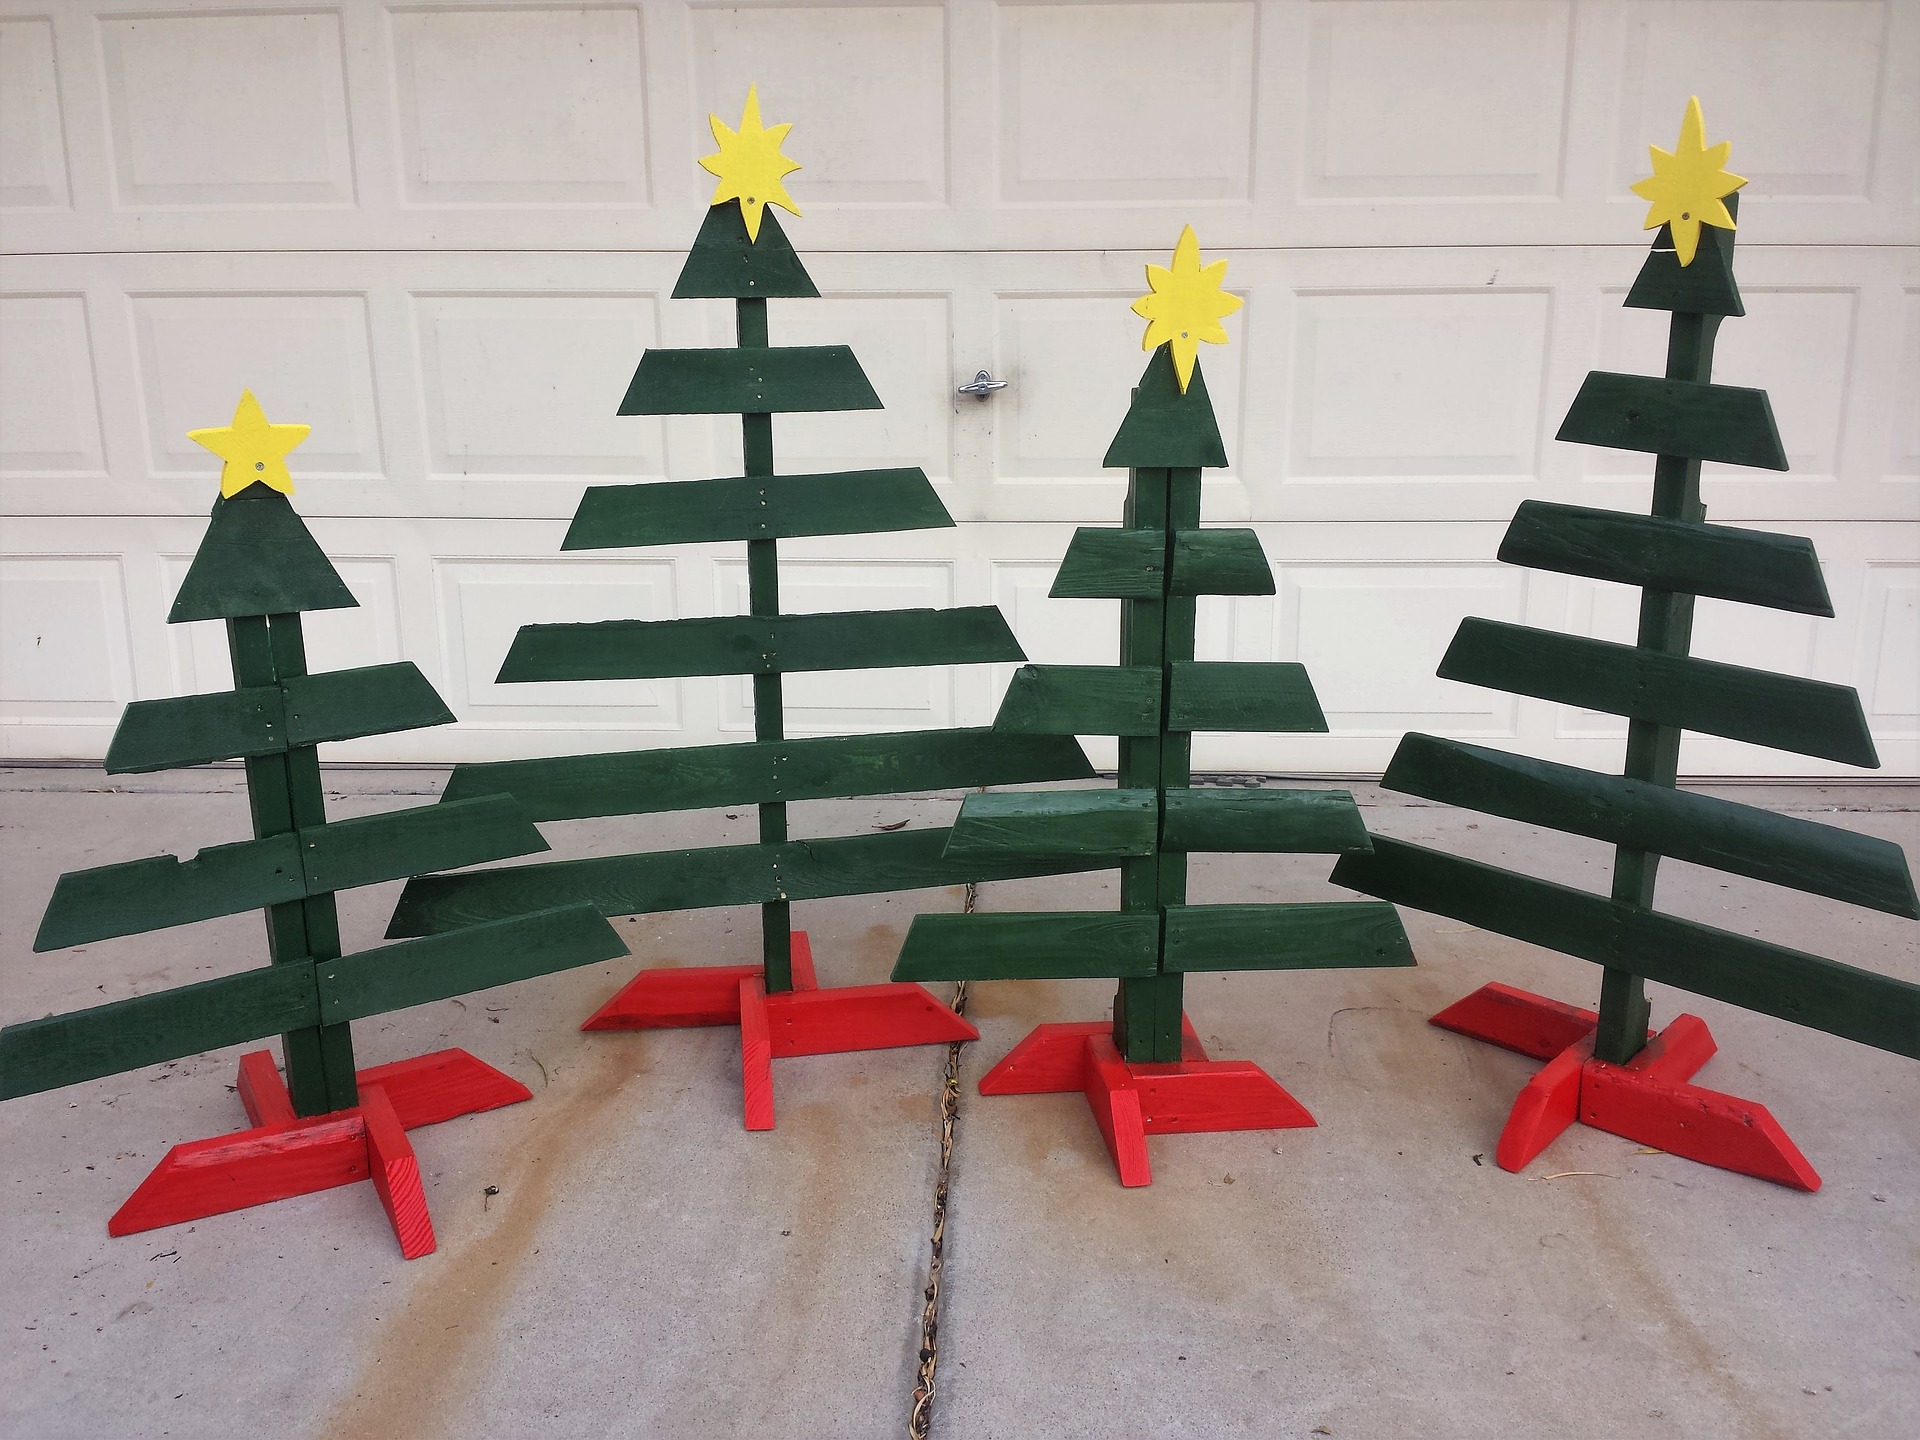 Four handmade Christmas trees of varying sizes featuring wooden boards colored green and red and topped off with yellow stars.